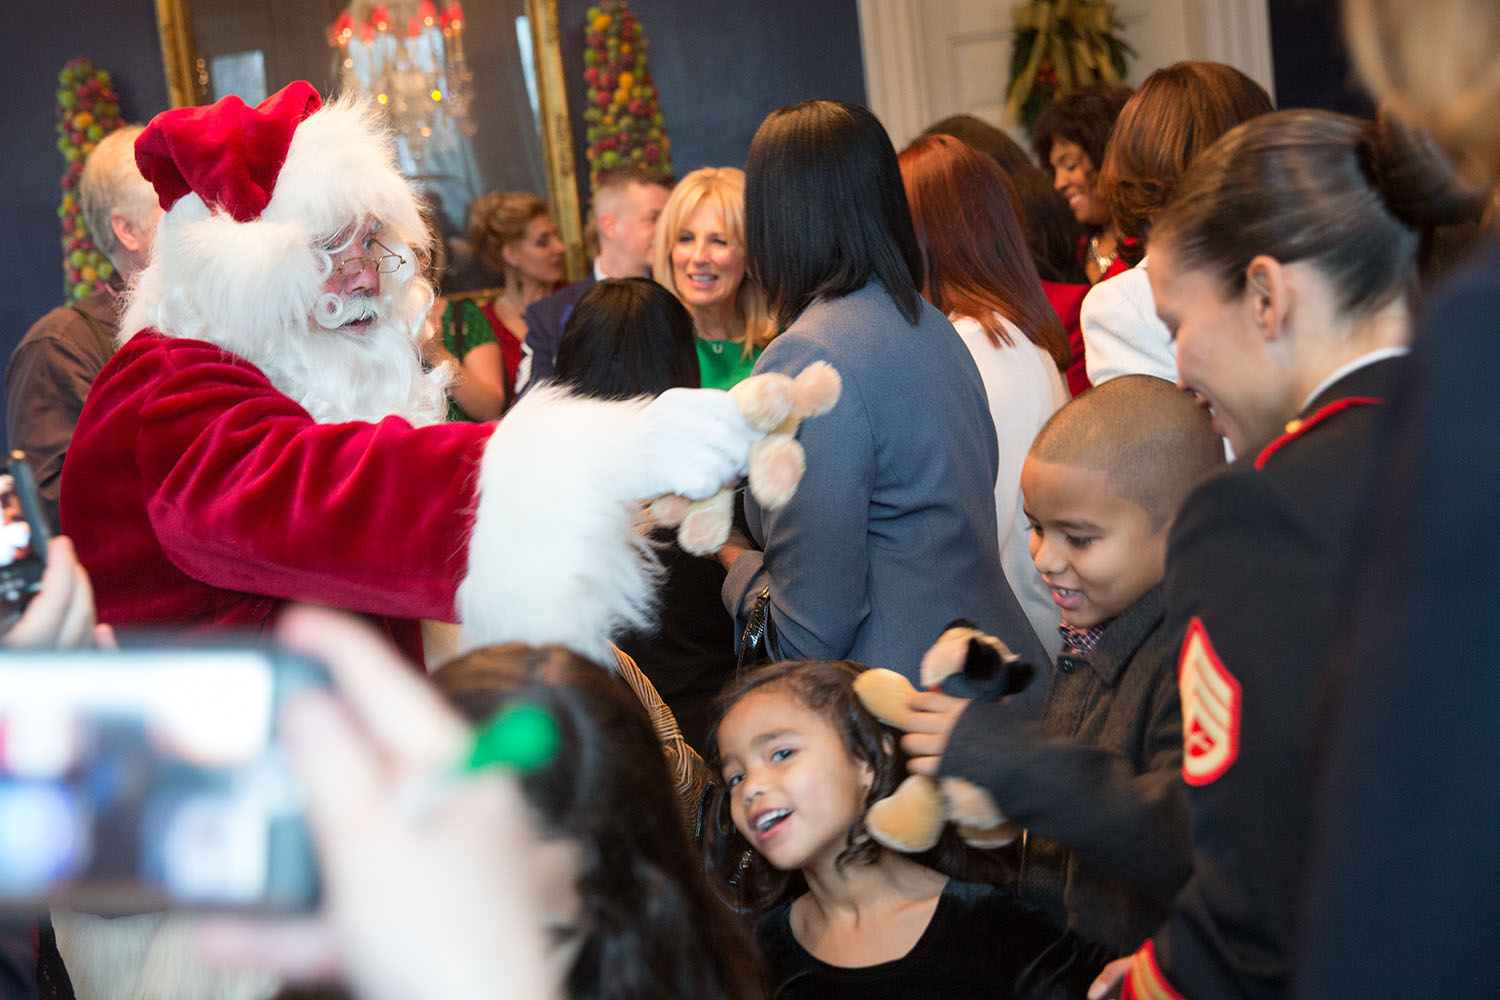 Santa Claus hands out stuffed champ dogs during a holiday celebration in honor of our military, veterans and their families, at the Naval Observatory Residence, in Washington, D.C., December 3, 2014. (Official White House Photo by David Lienemann)